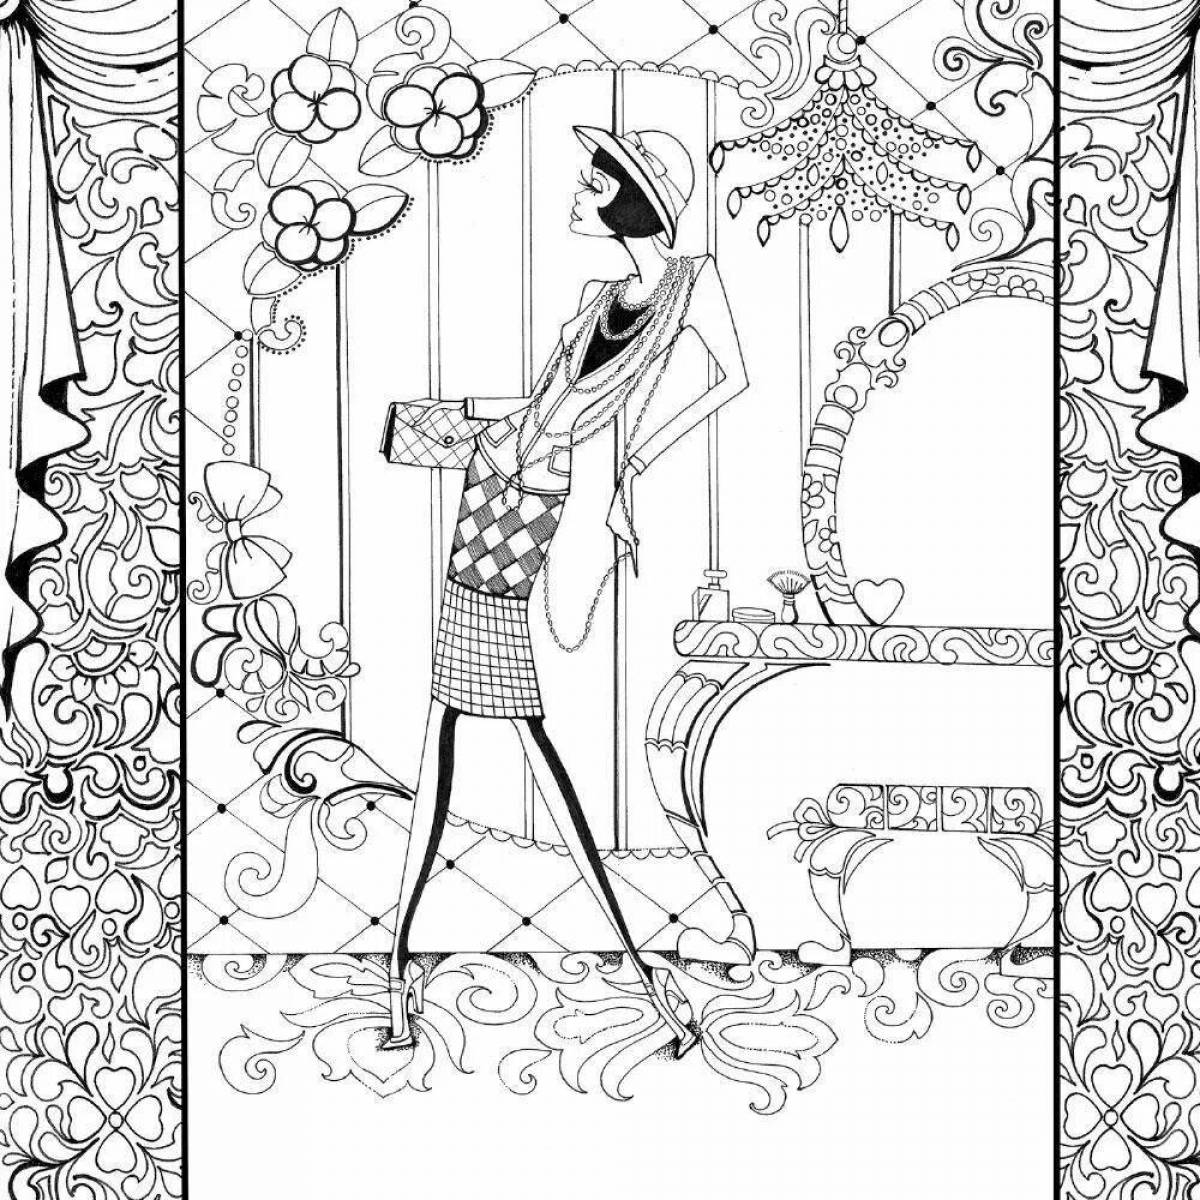 Coloring page playful fashion show